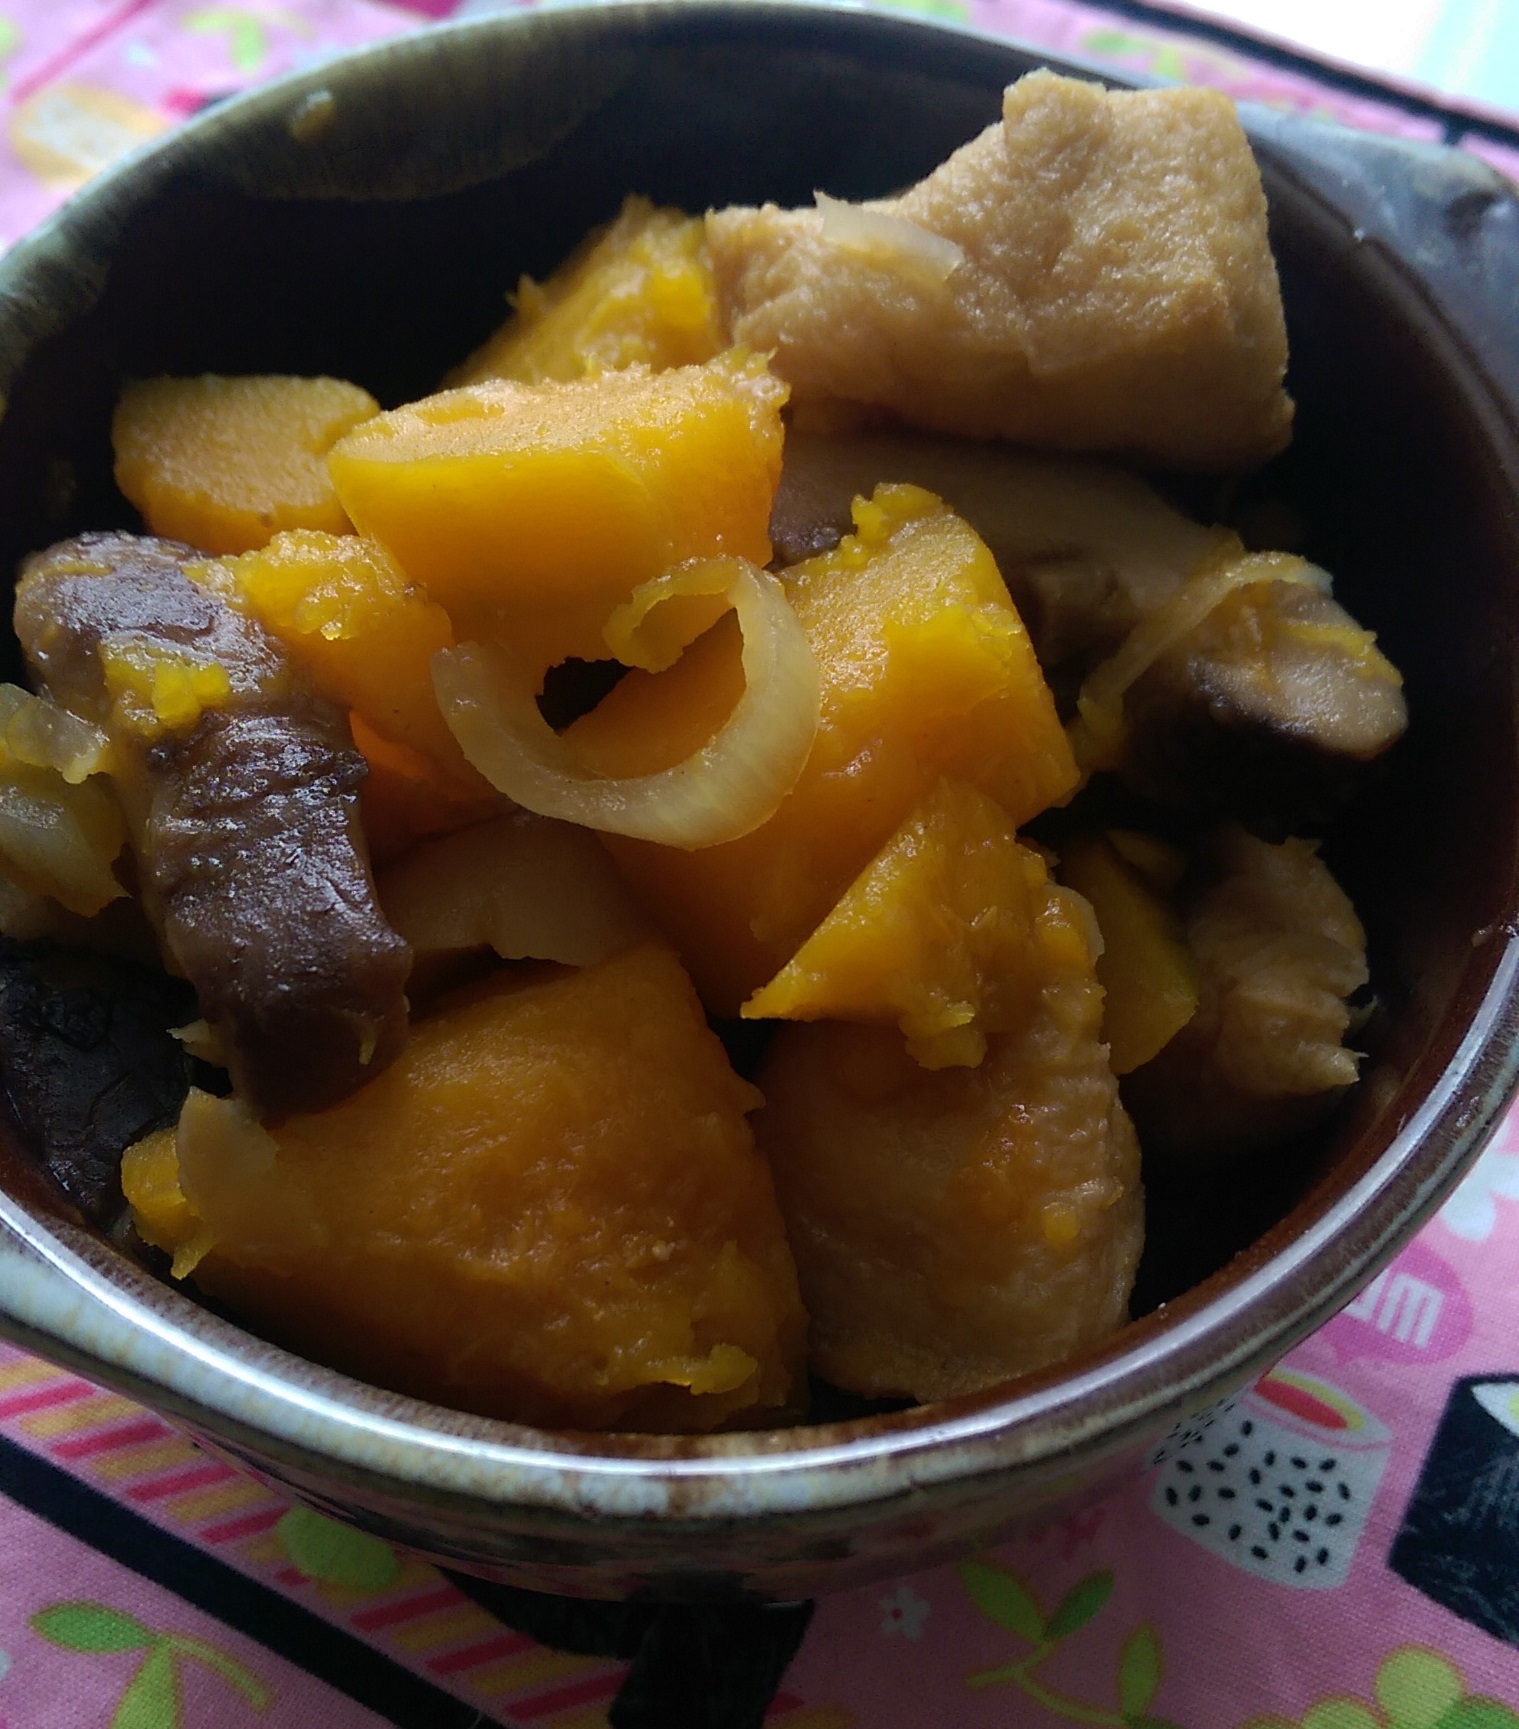 Simmered Kabocha Pumpkin and Fried Tofu with Sweet Soy Sauce